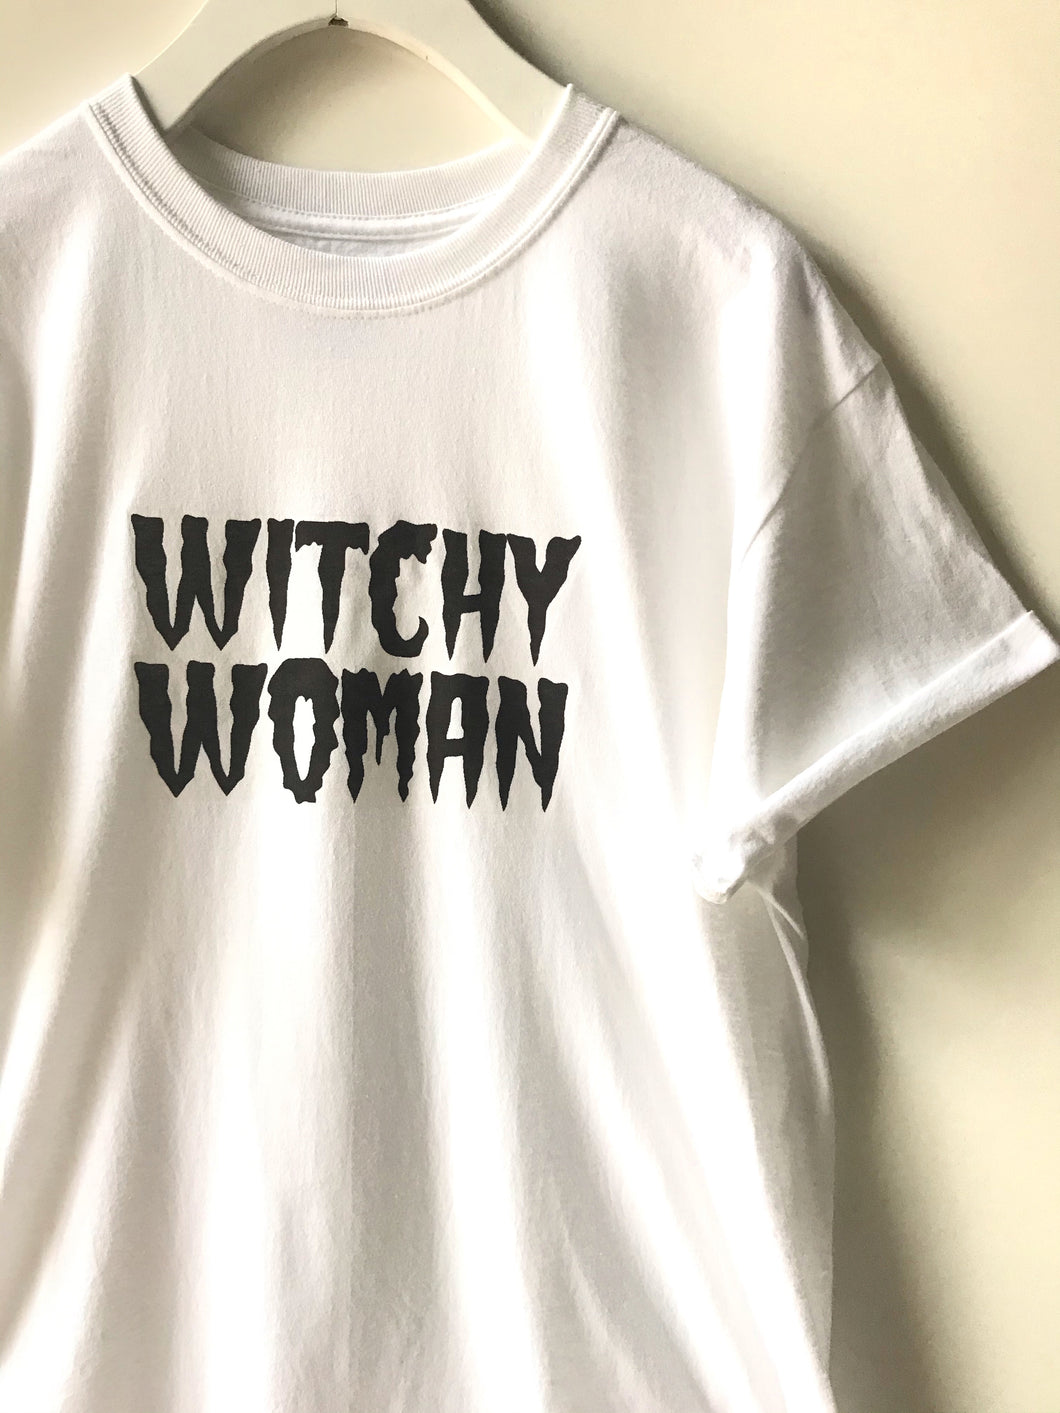 WITCHY WOMAN T-SHIRT